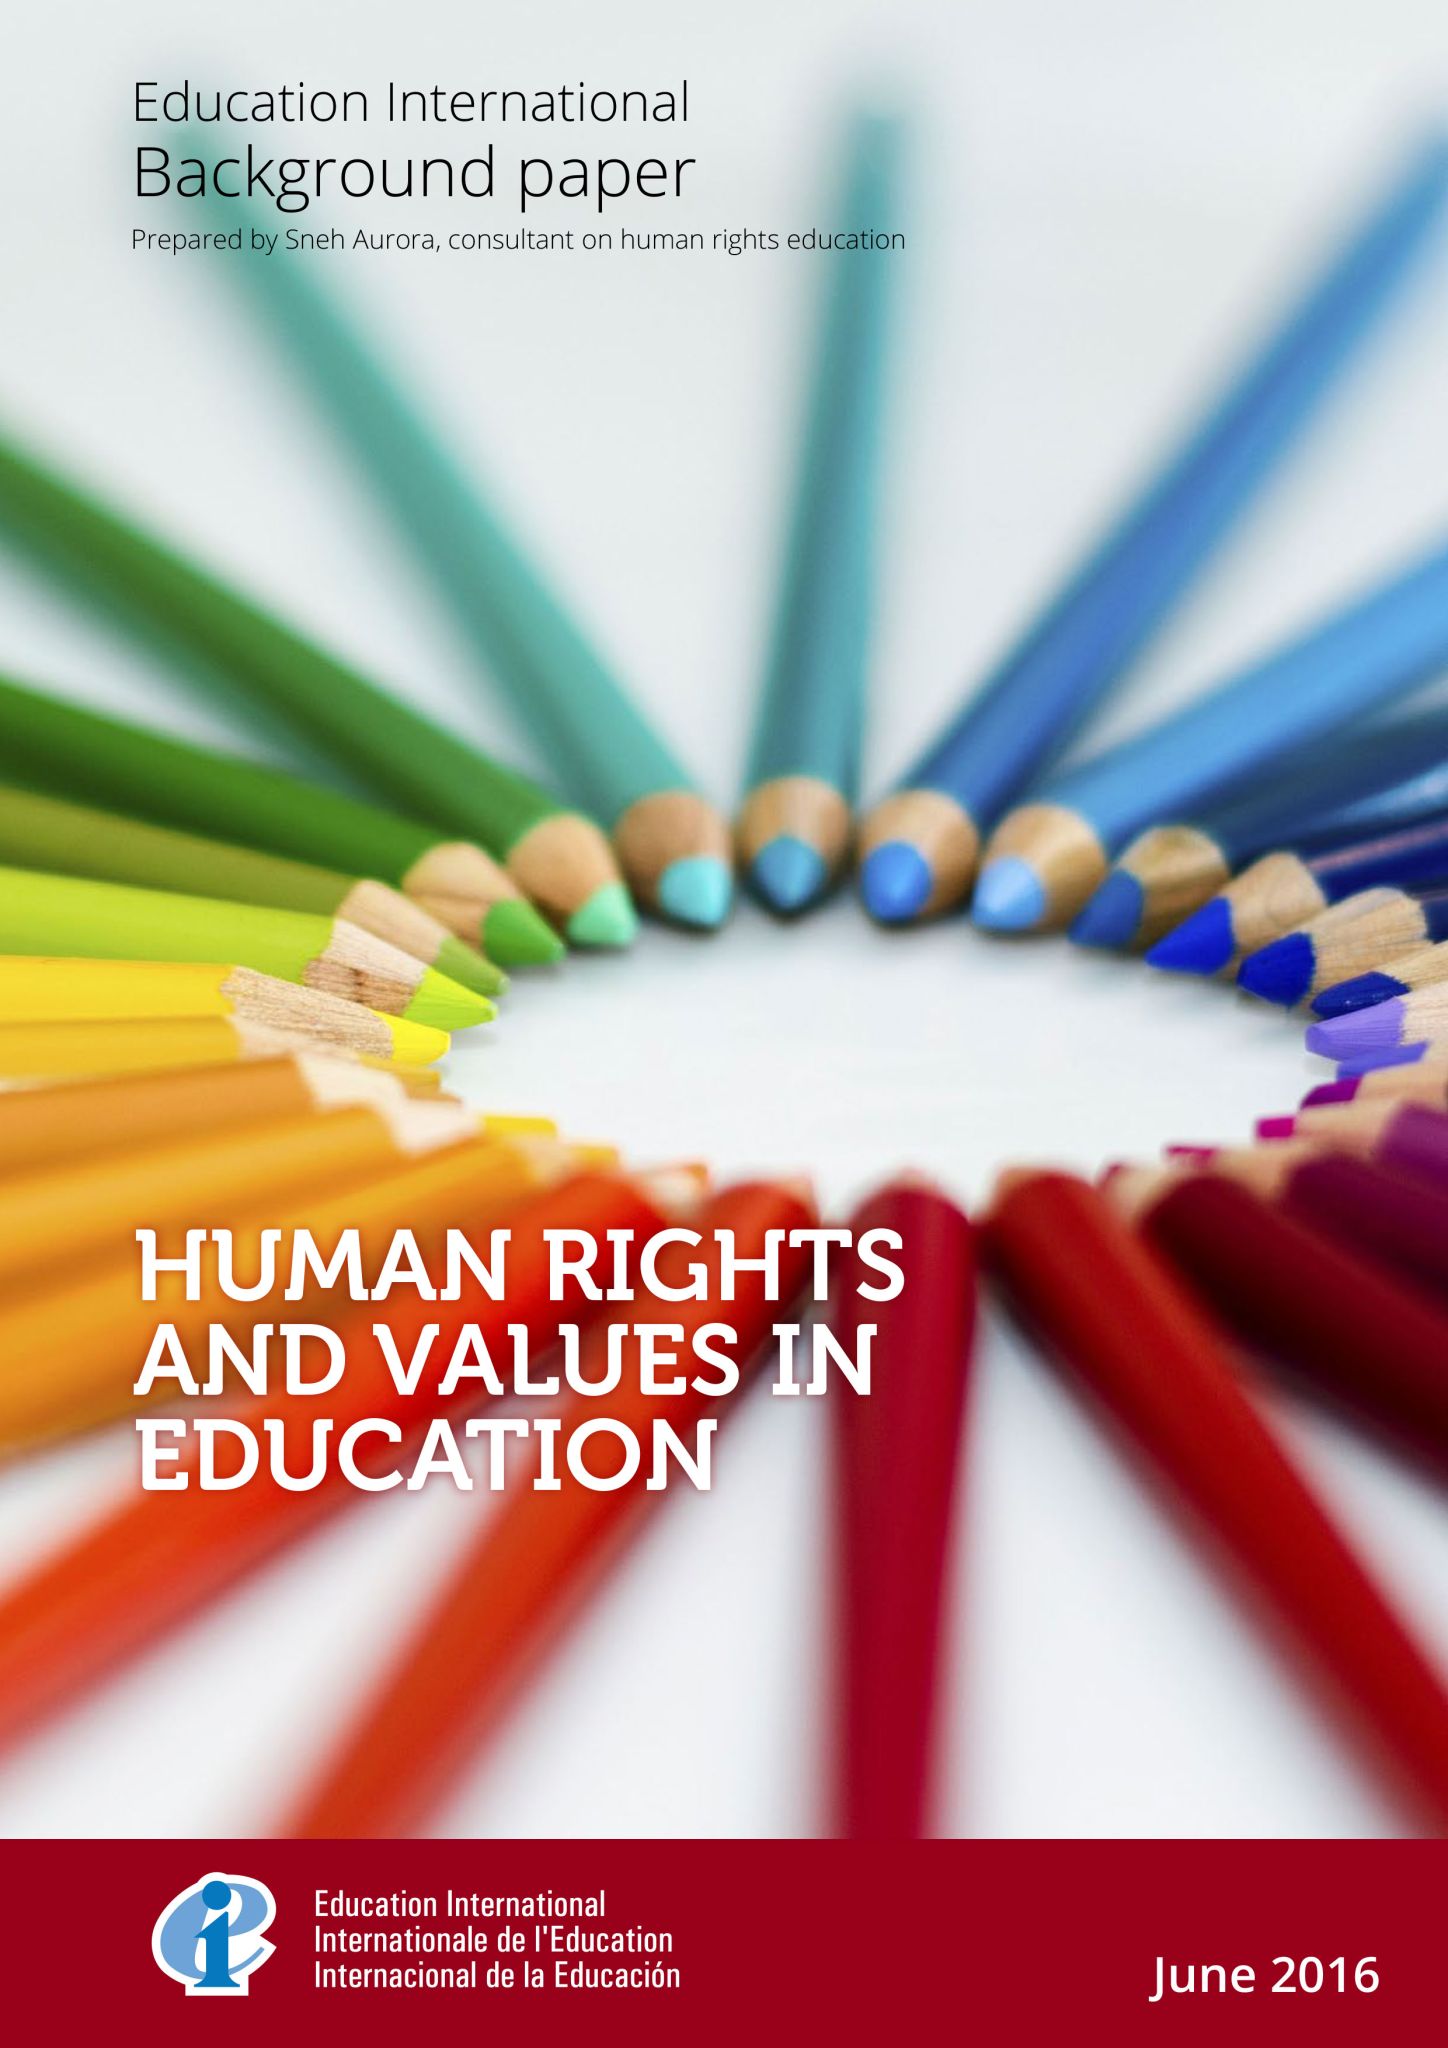 define human rights in value education